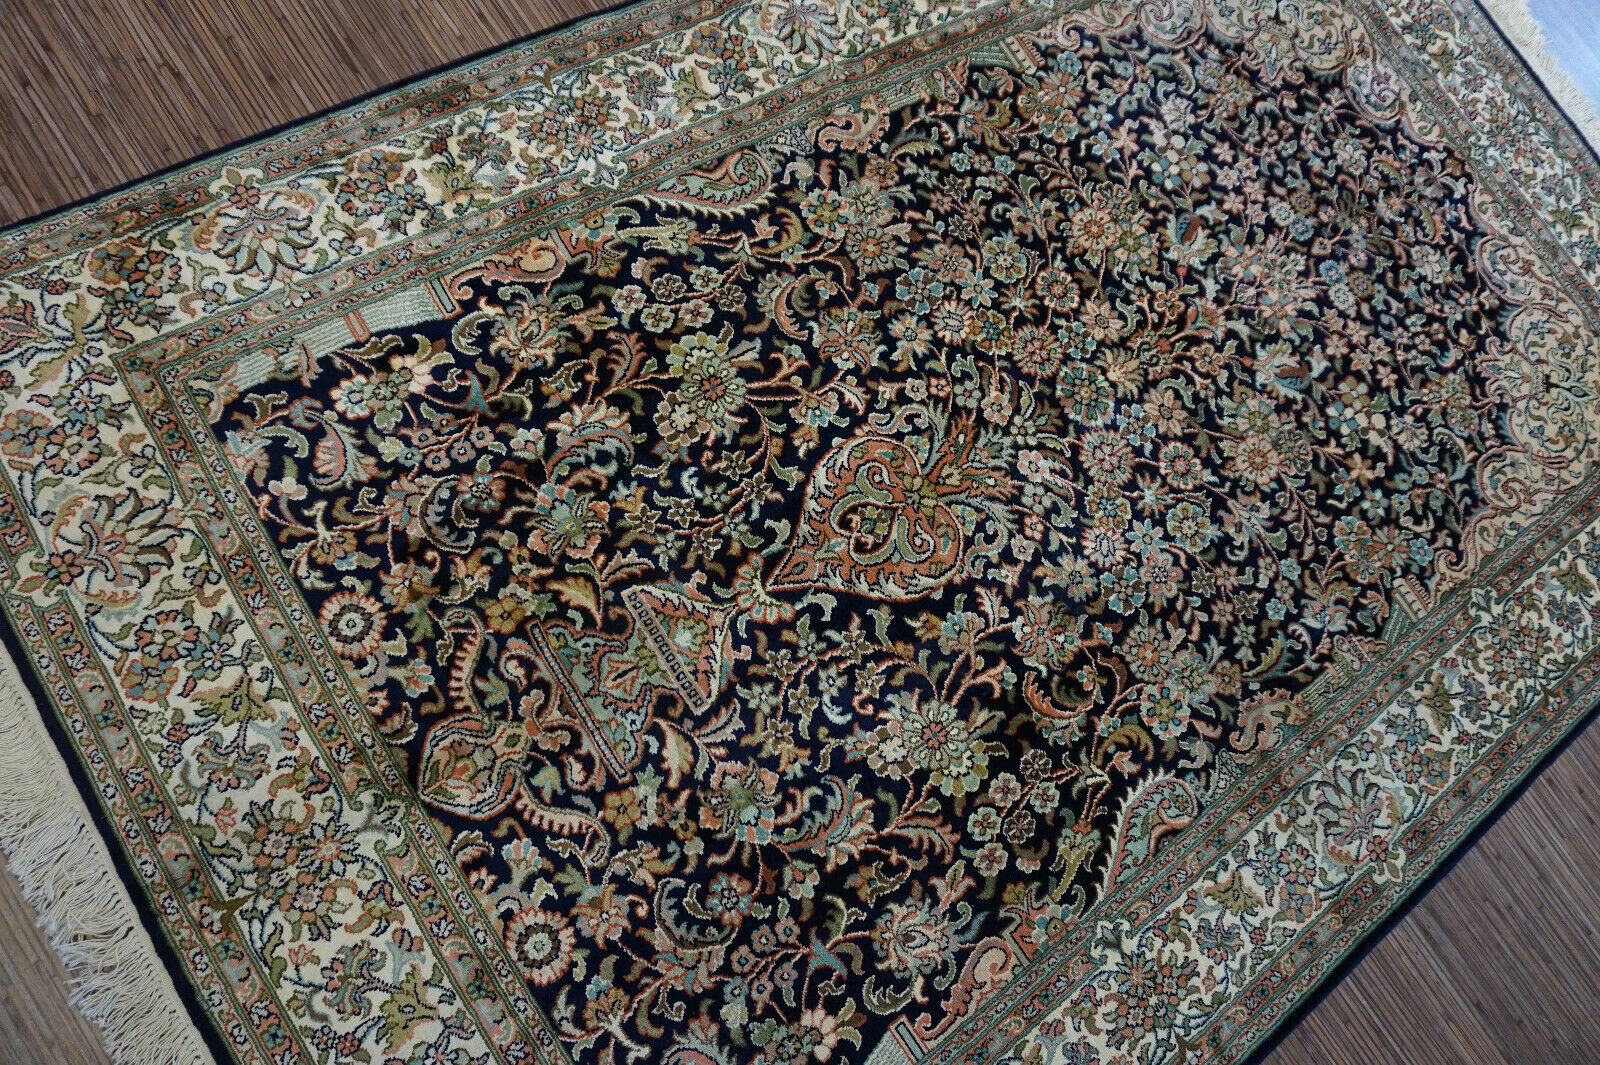 Side angle shot of the Handmade Vintage Persian Kashmir Rug showcasing size and scale